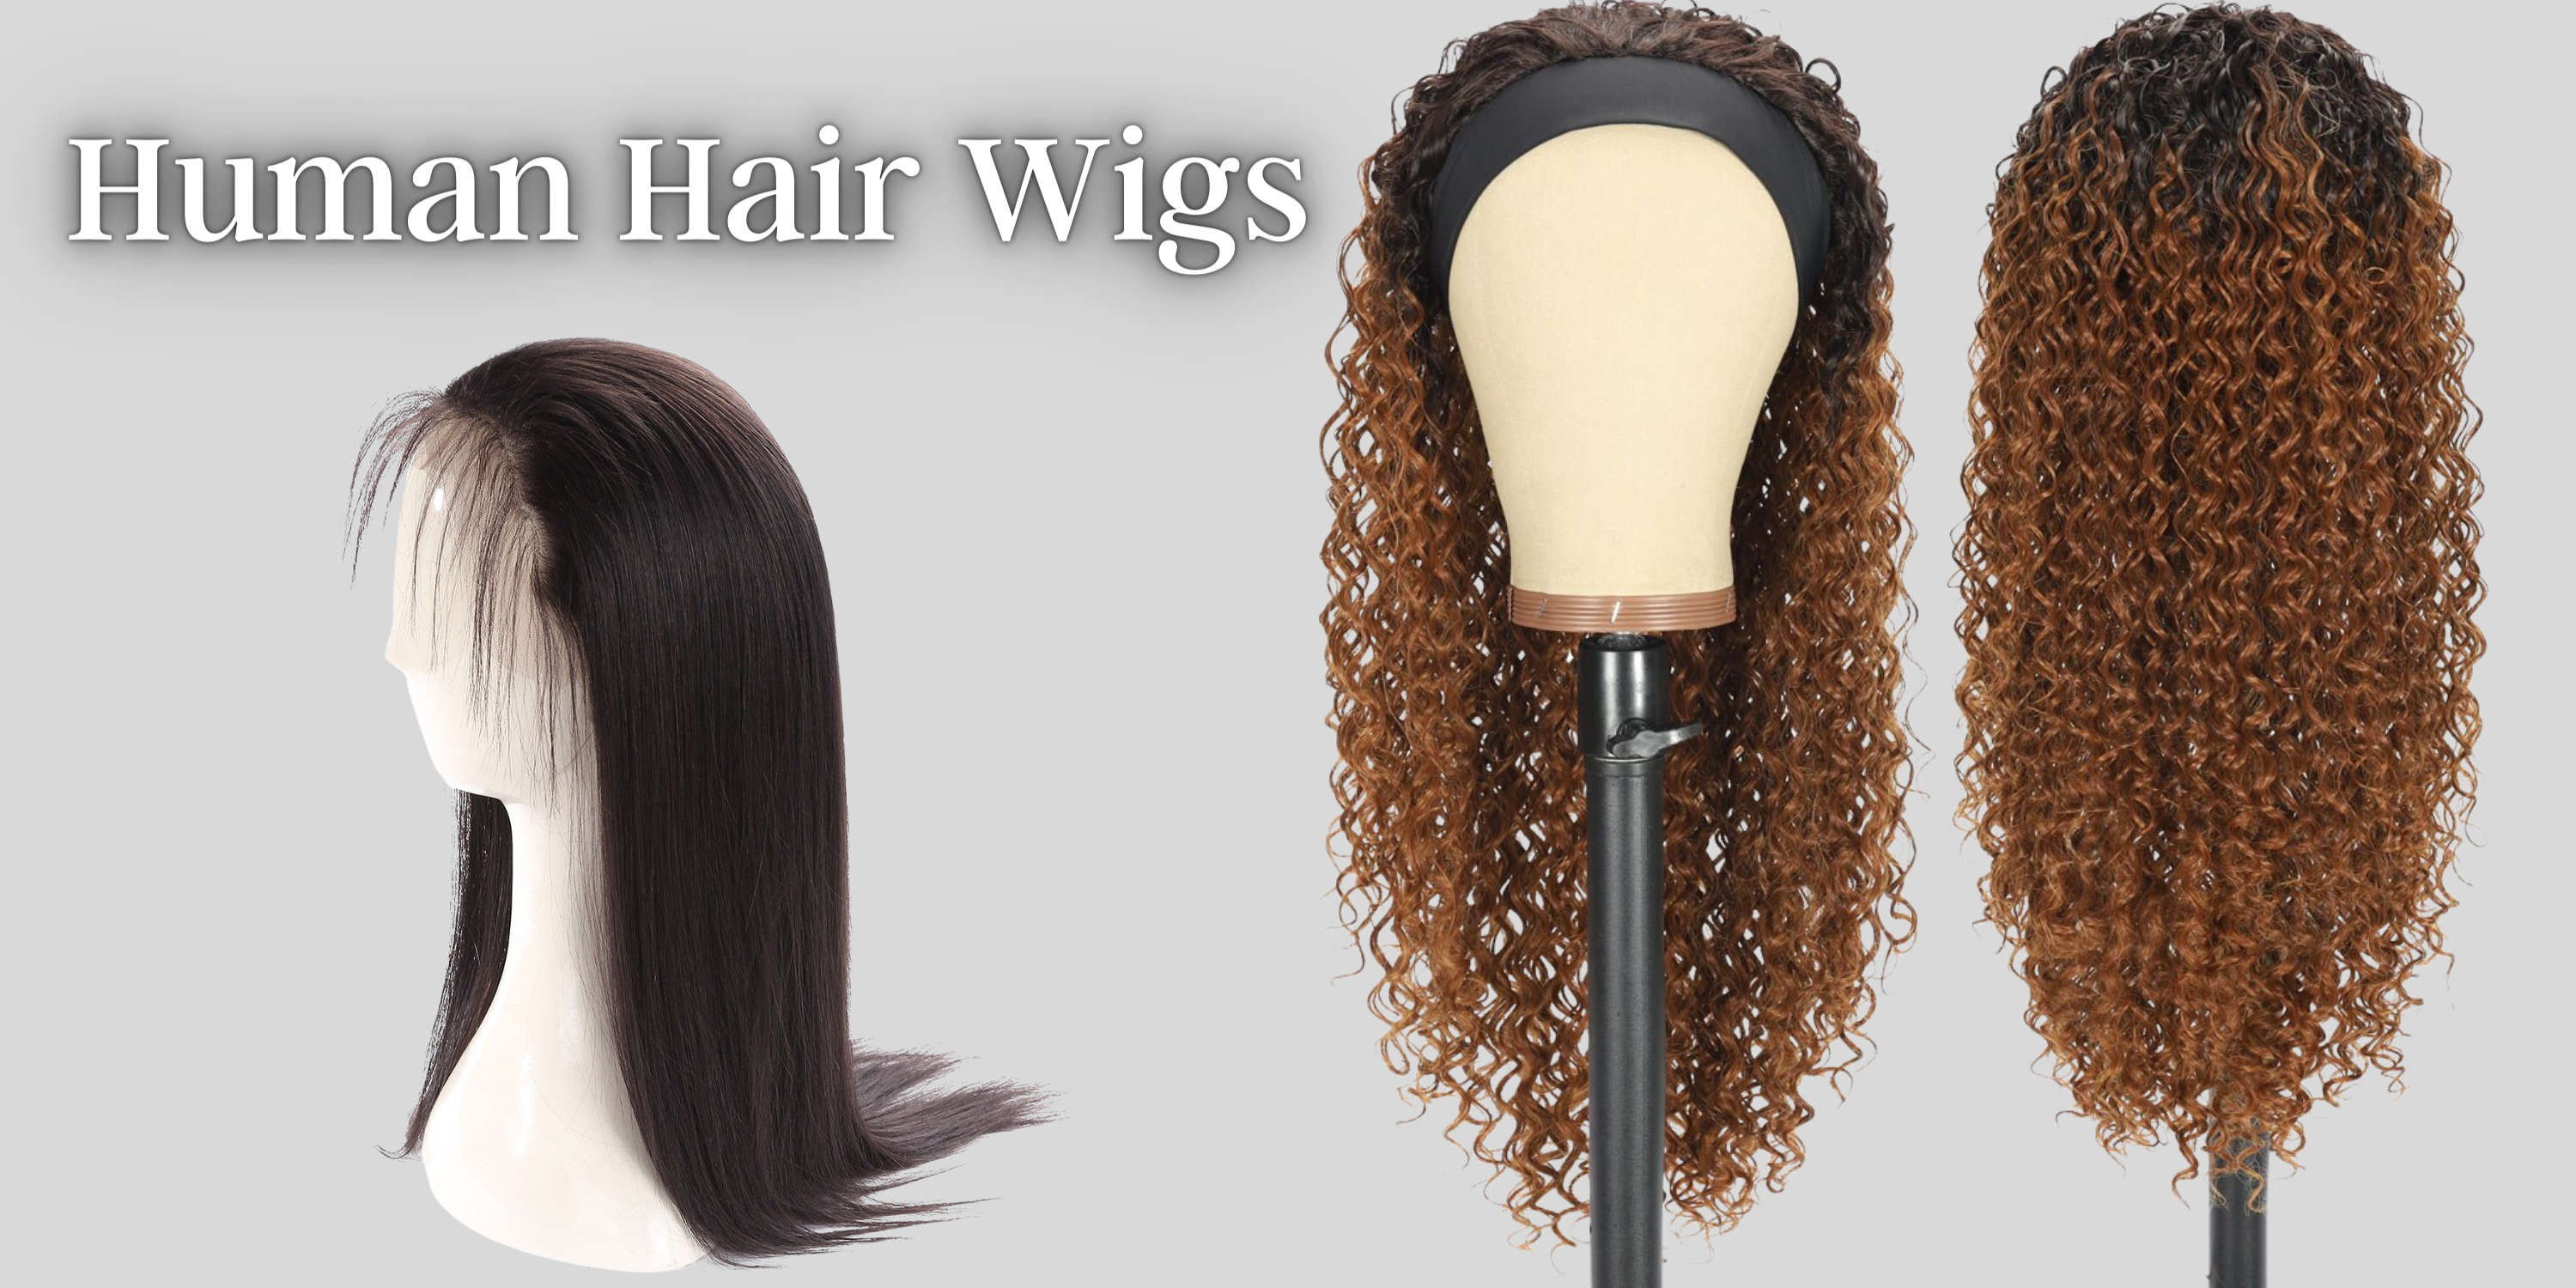 Are Human Hair Wigs Any Good? Seven Ways You Can Be Certain